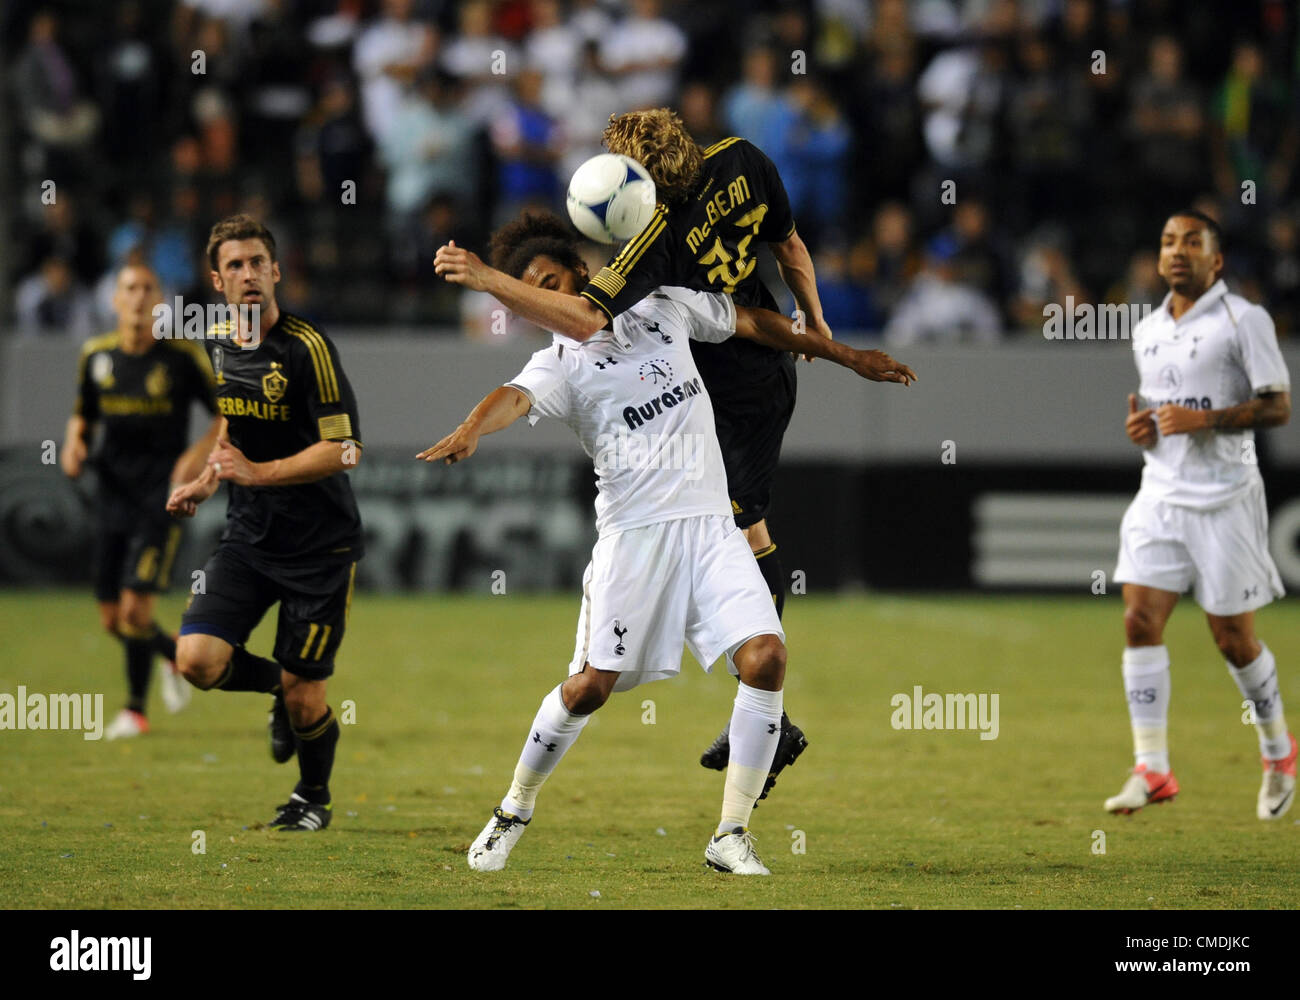 USA. 24.07.2012. Los Angeles, California.  Tottenham Hotspur (32) Benoit Assou-Ekotto and Galaxy (32) Jack McBean get tangled up while going for the ball during an international friendly soccer match between Tottenham Hotspur and the Los Angeles Galaxy at the Home Depot Center in Carson, CA. Stock Photo